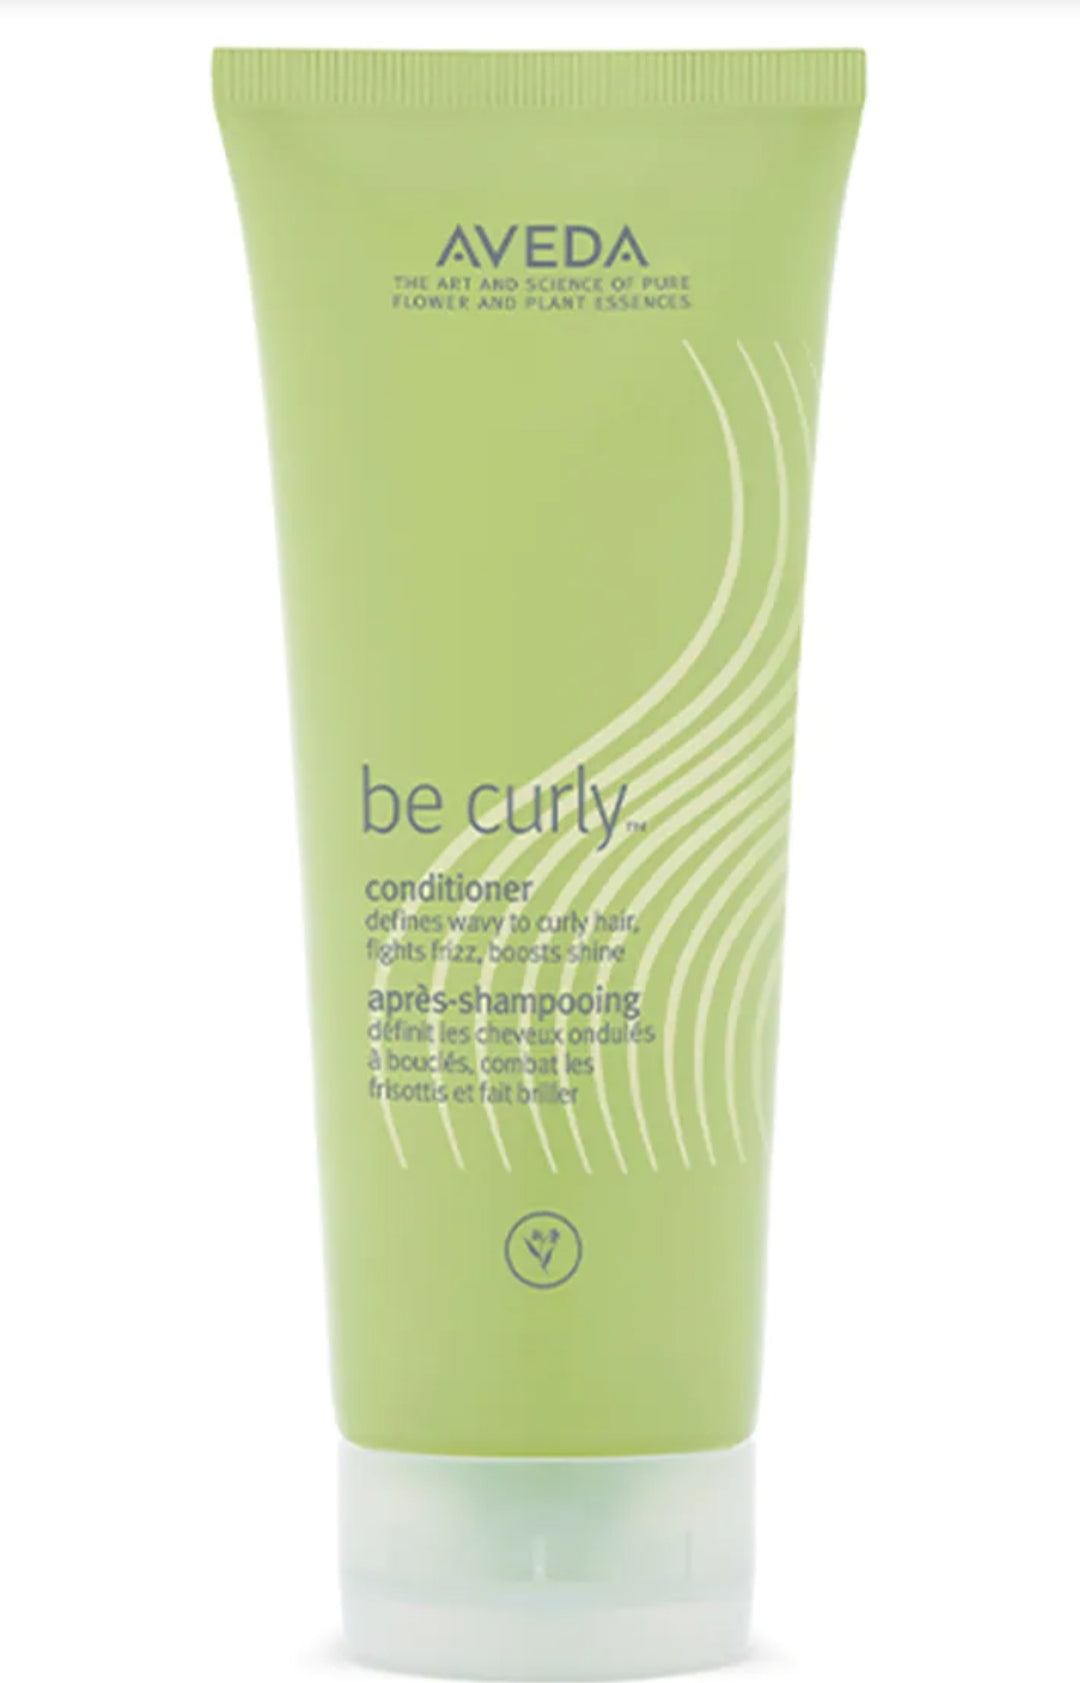 Aveda be curly Conditioner